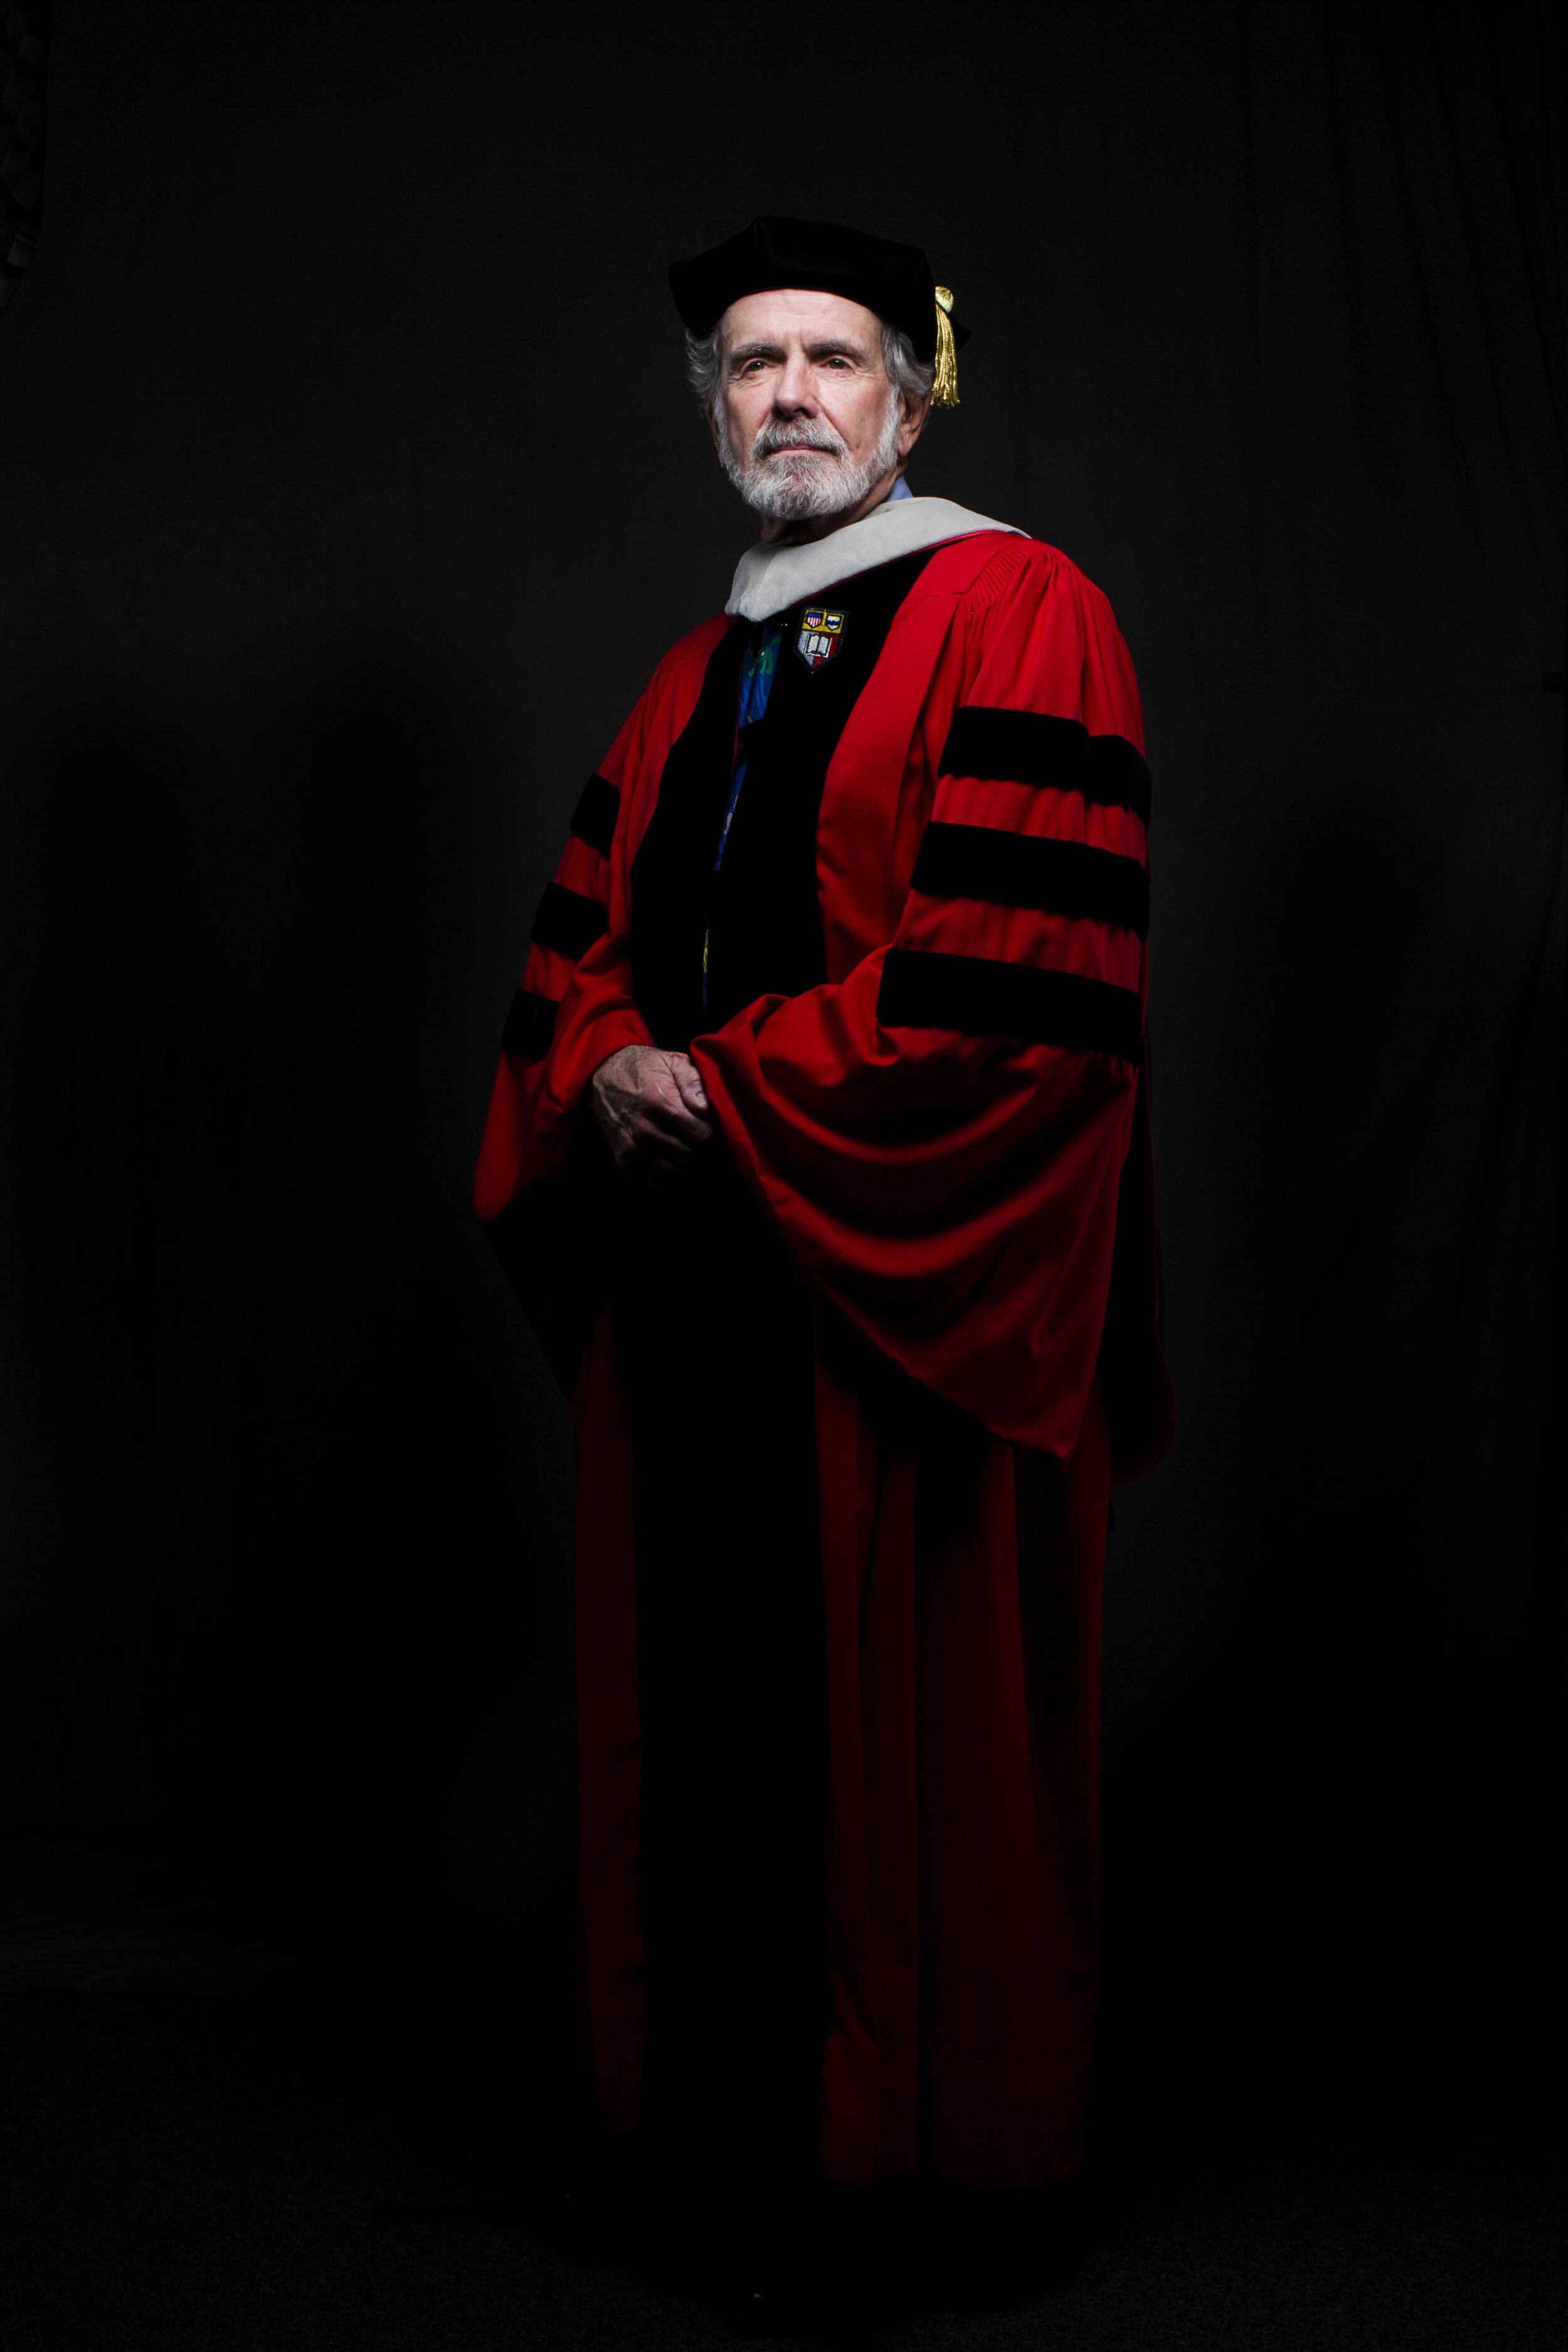  Professor Emeritus Anthony “Tony” Schwartz is photographed wearing a gray hood and carnelian red robes from Cornell University, where he received his veterinary degree. Schwartz, who served as a professor of surgery and associate dean at Cummings Sc